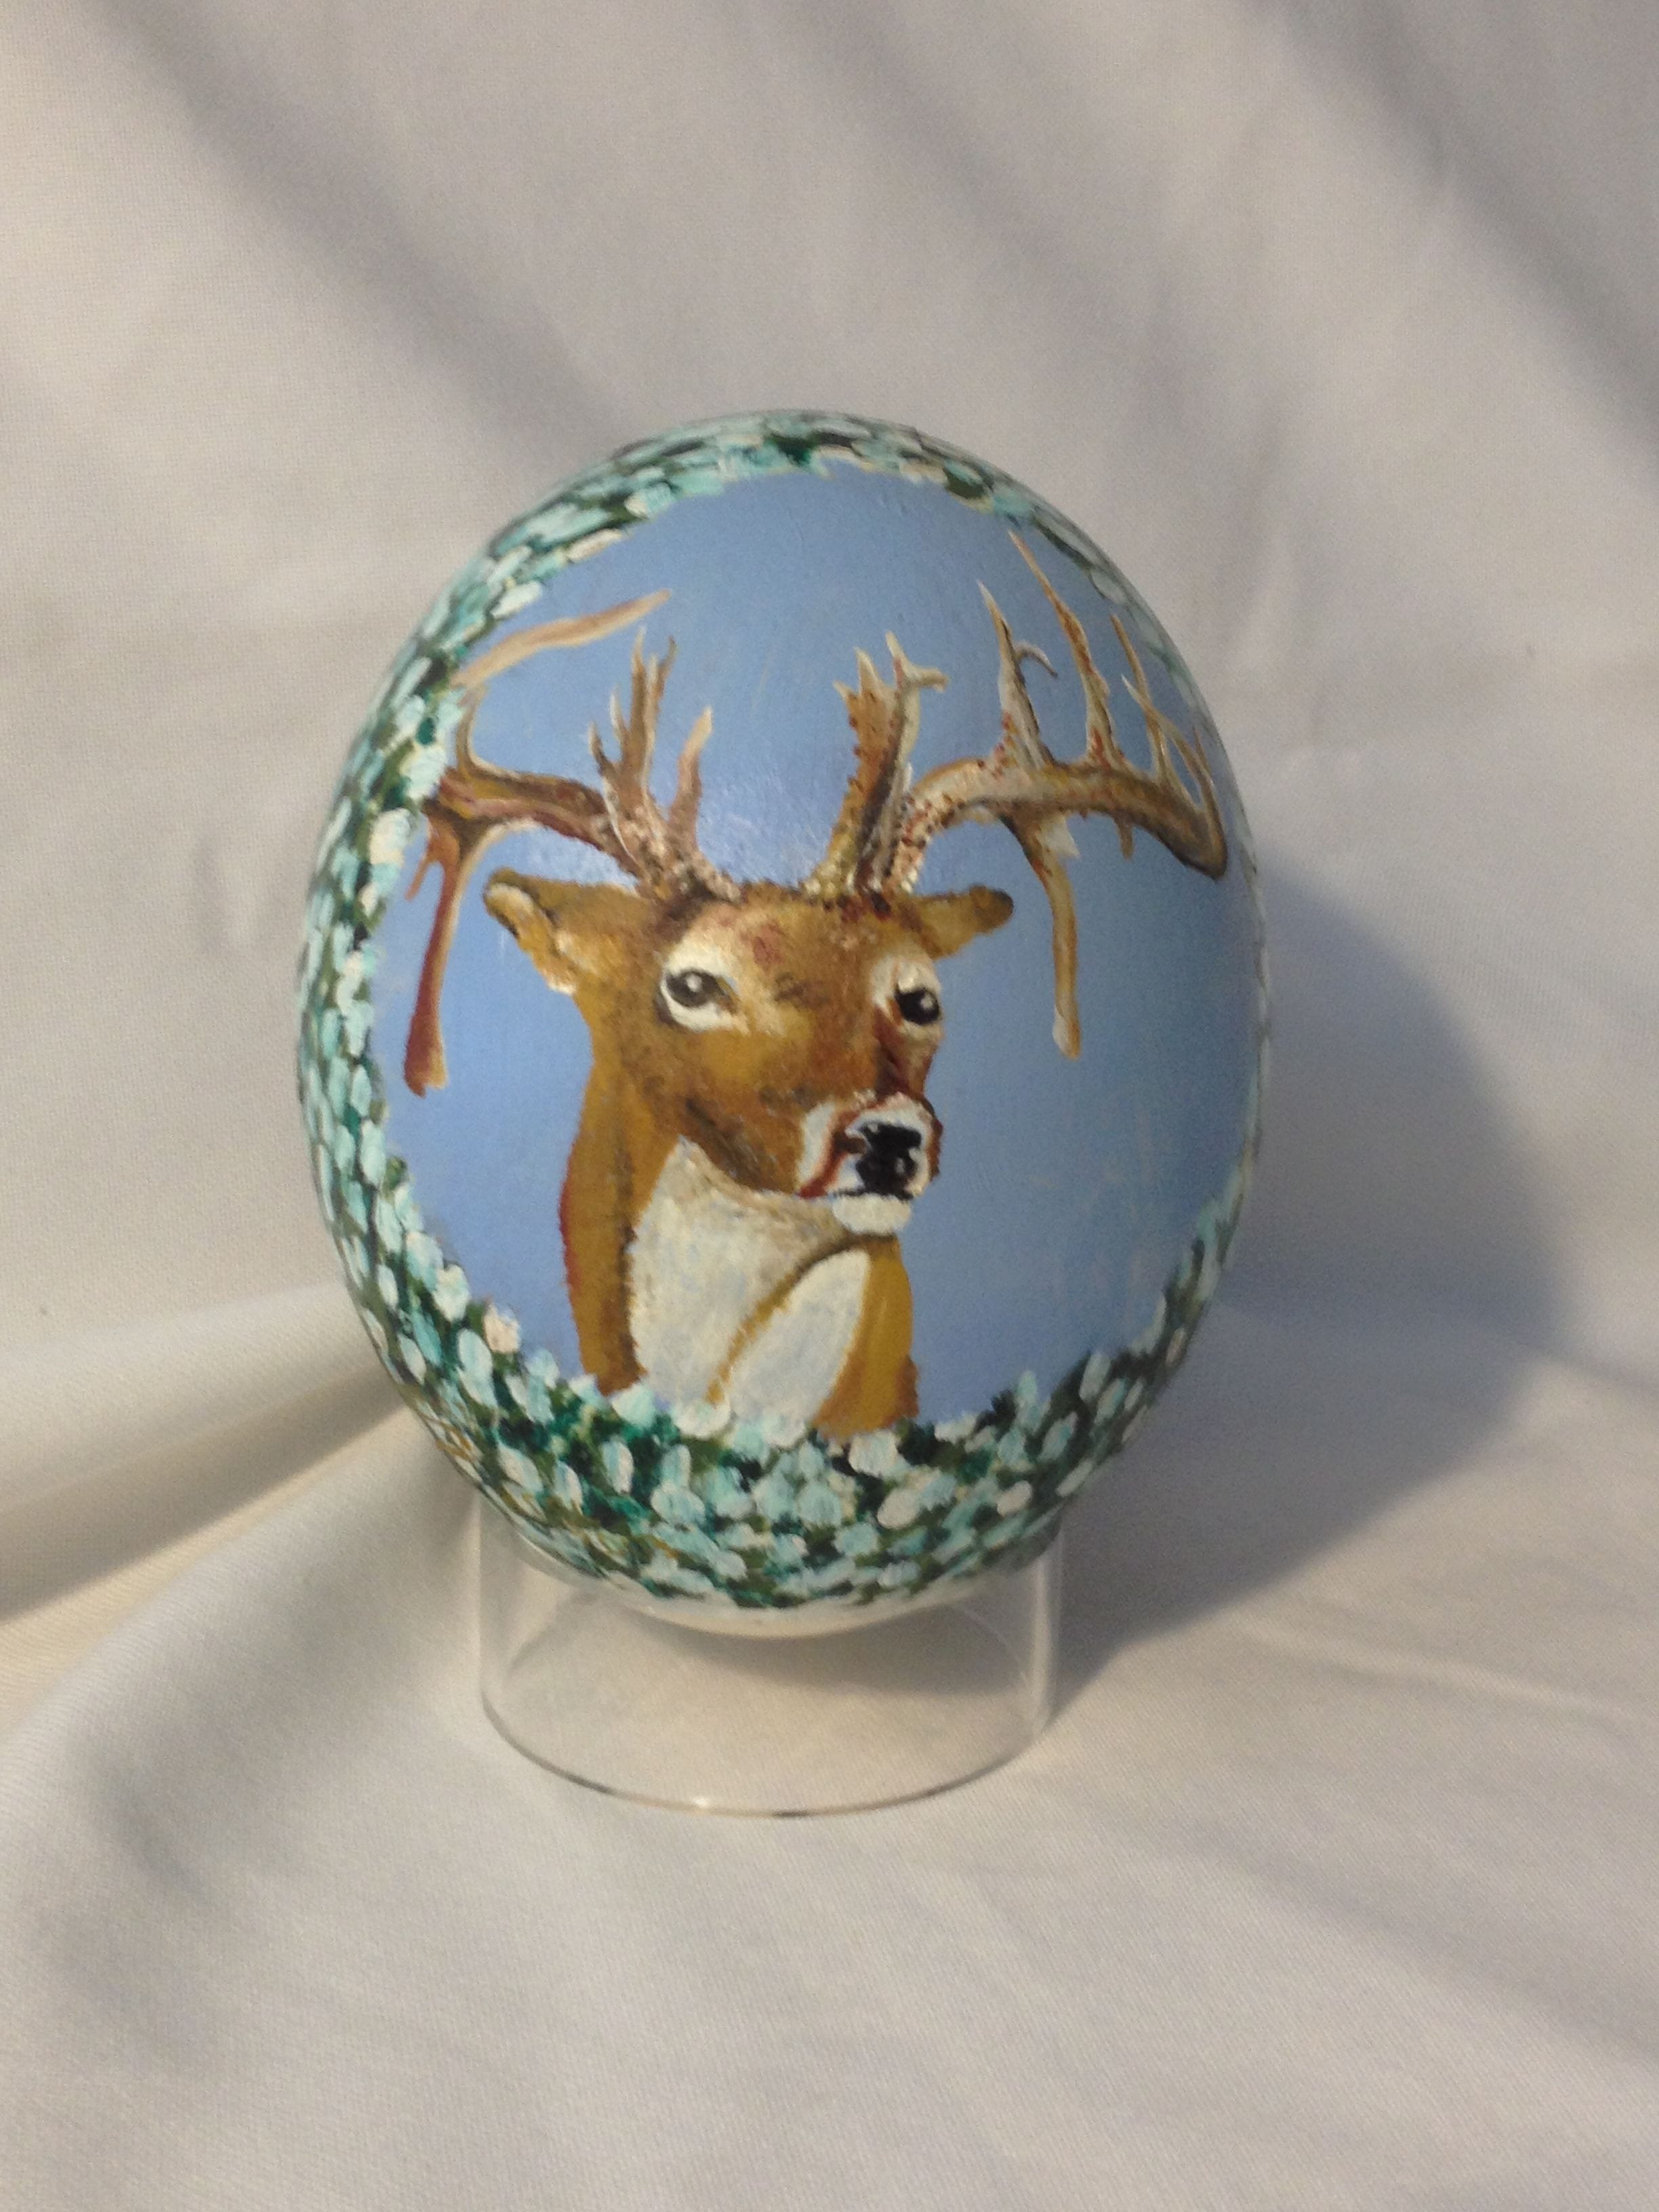 Oil paint on Ostrich egg of Hole in the horn buck $80.